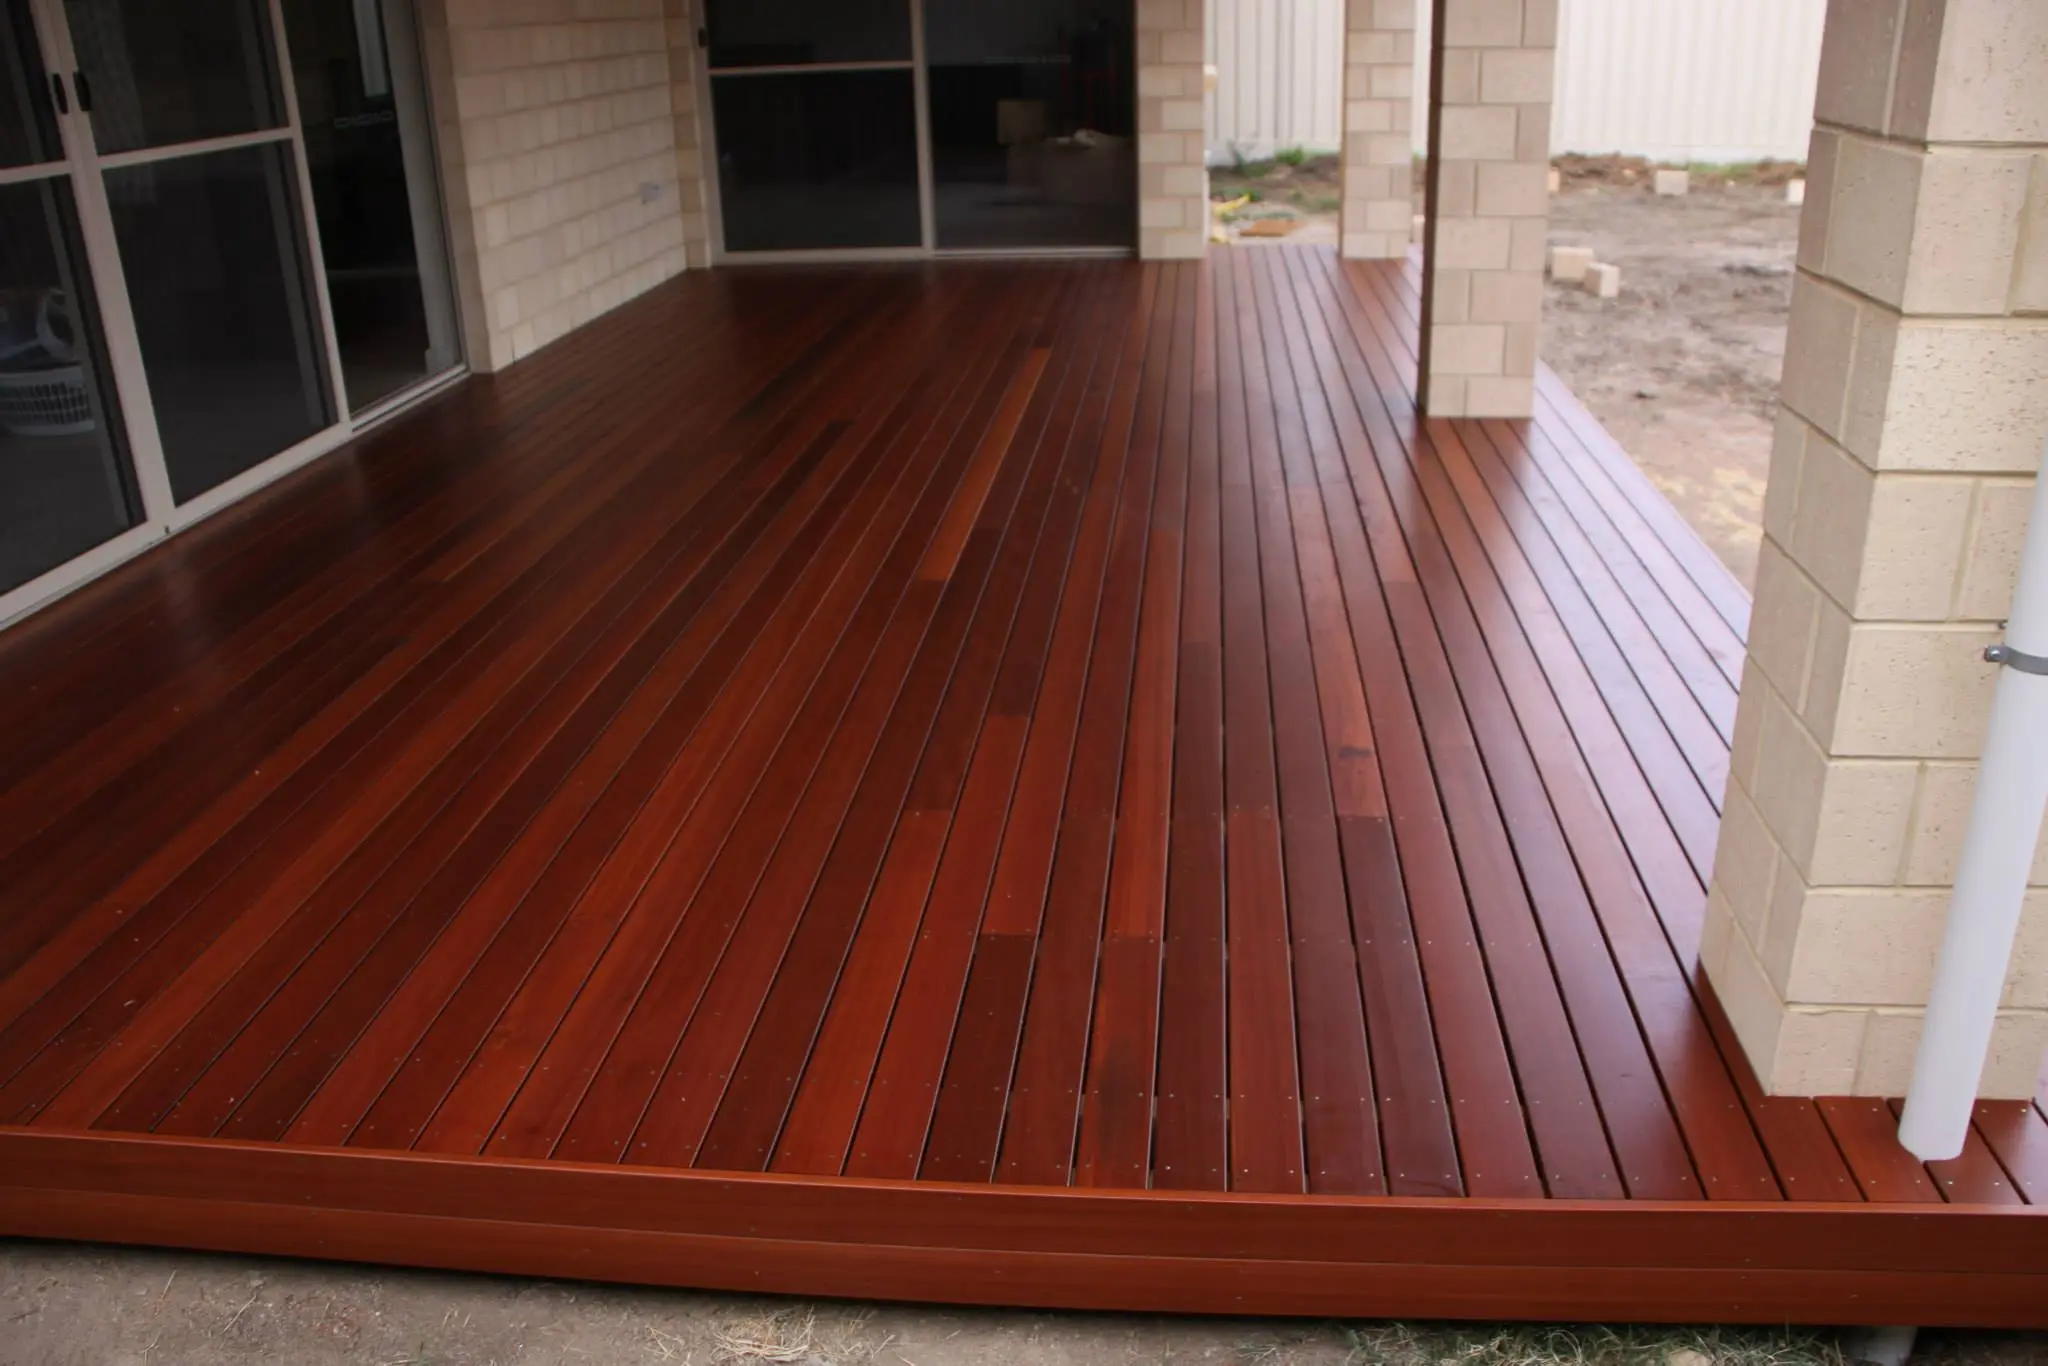 Decking area portfolio image to demonstrate a Residential service that Ideal Built offers its clients.